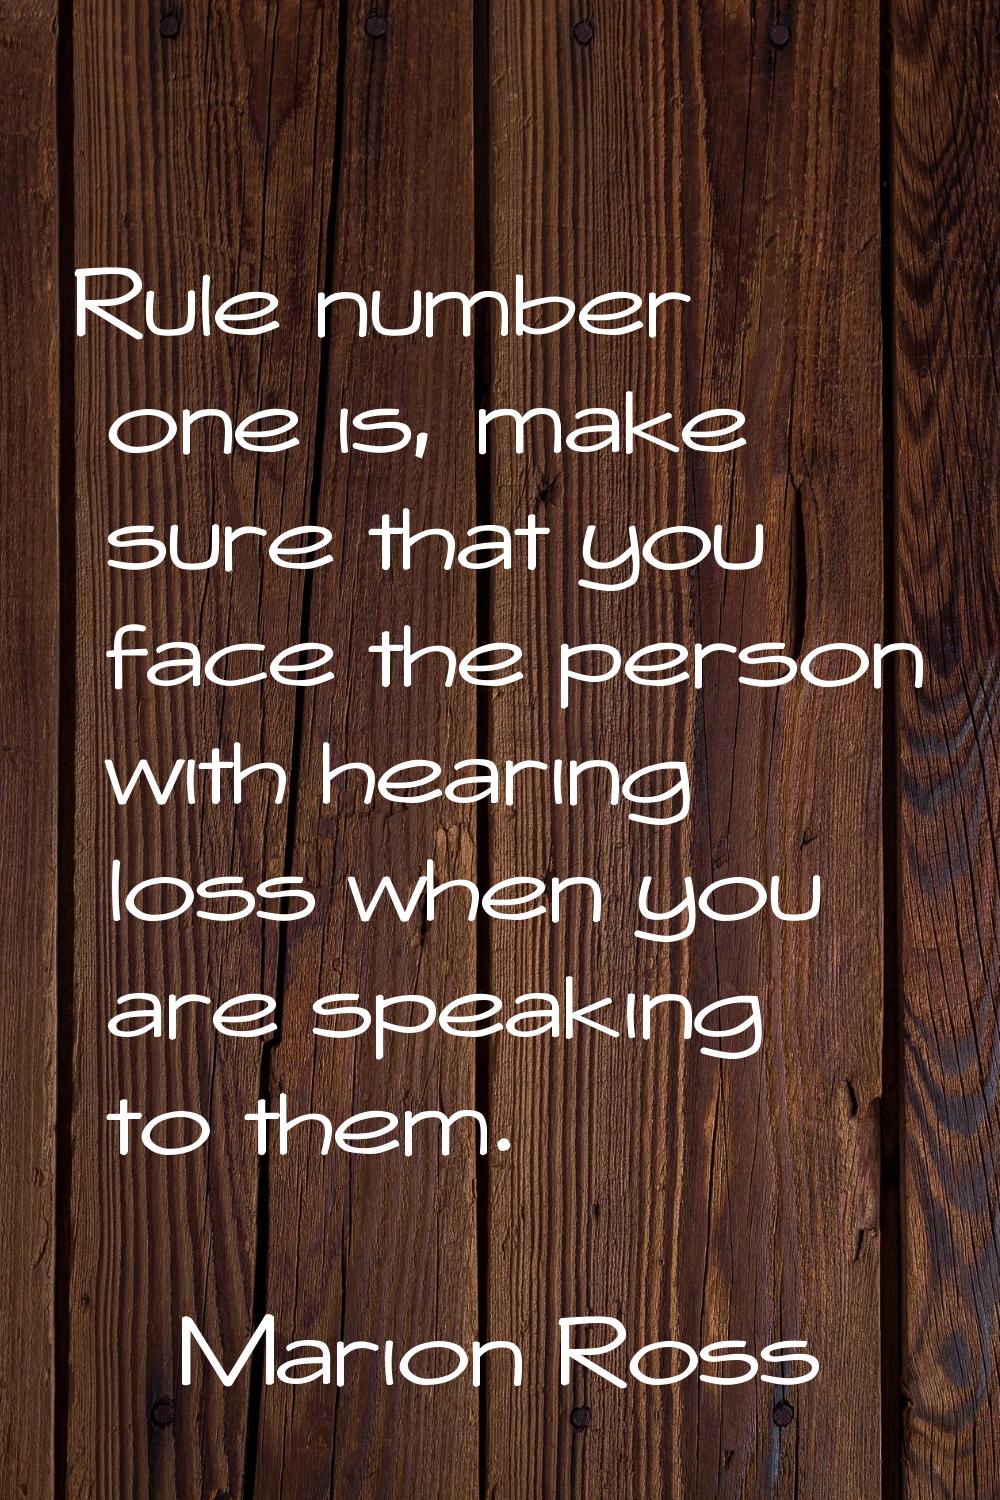 Rule number one is, make sure that you face the person with hearing loss when you are speaking to t